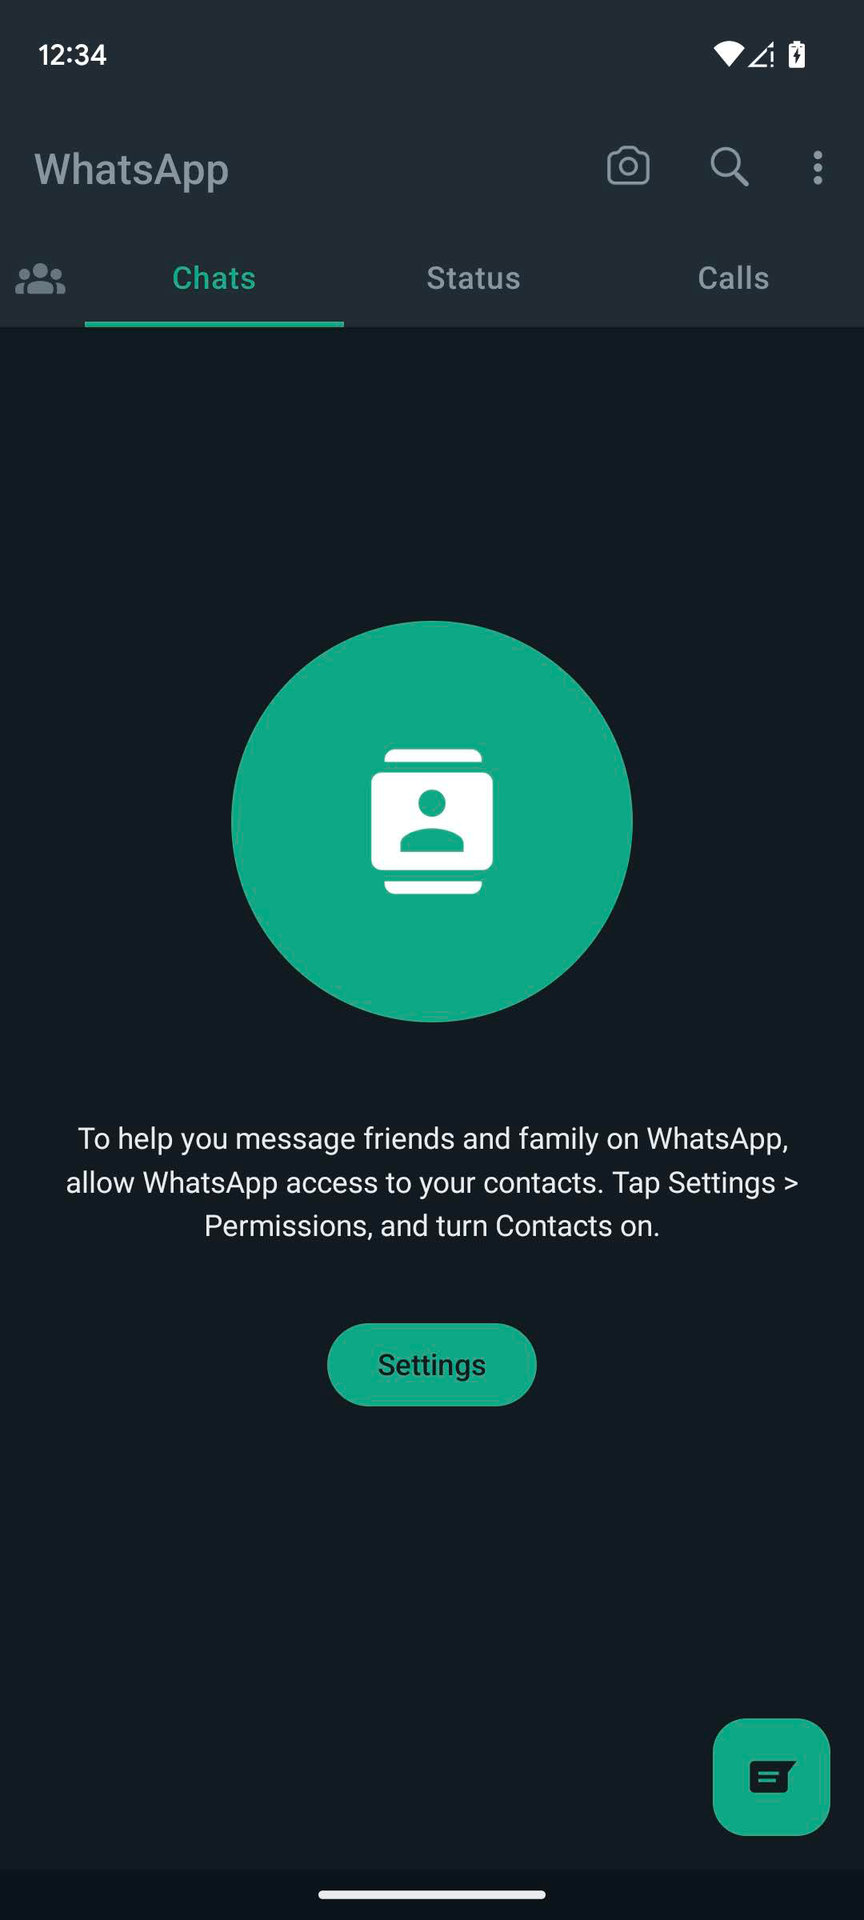 How to set up Android WhatsApp using a landline phone (8)